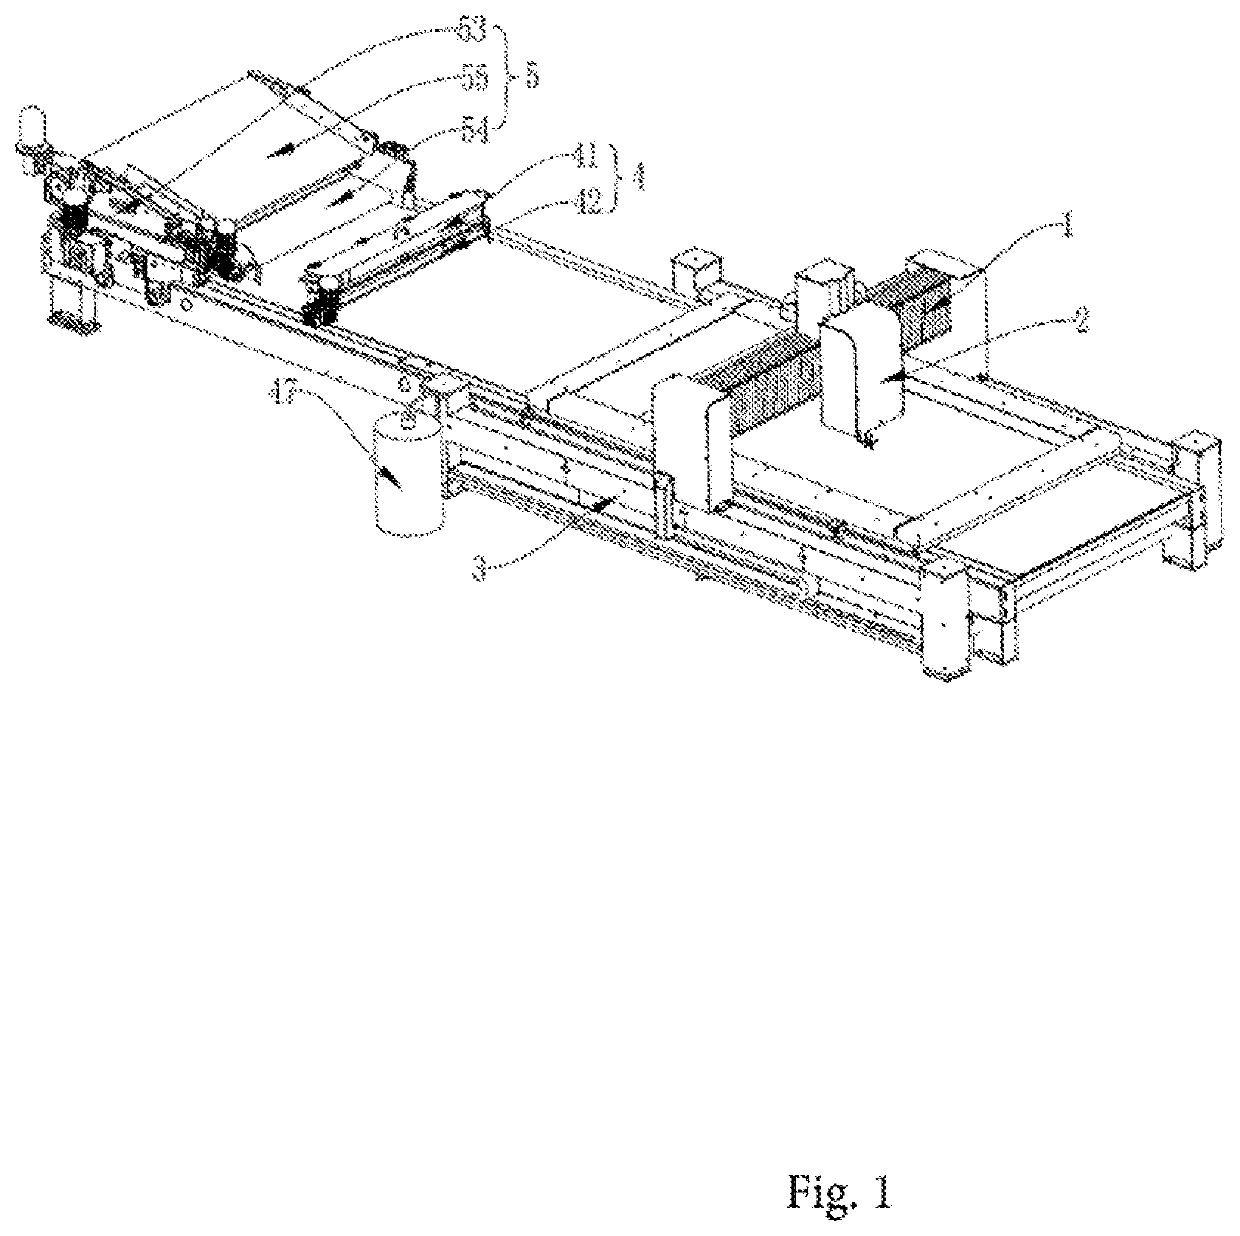 Interlayer mixing apparatus for texturing man-made stone slabs